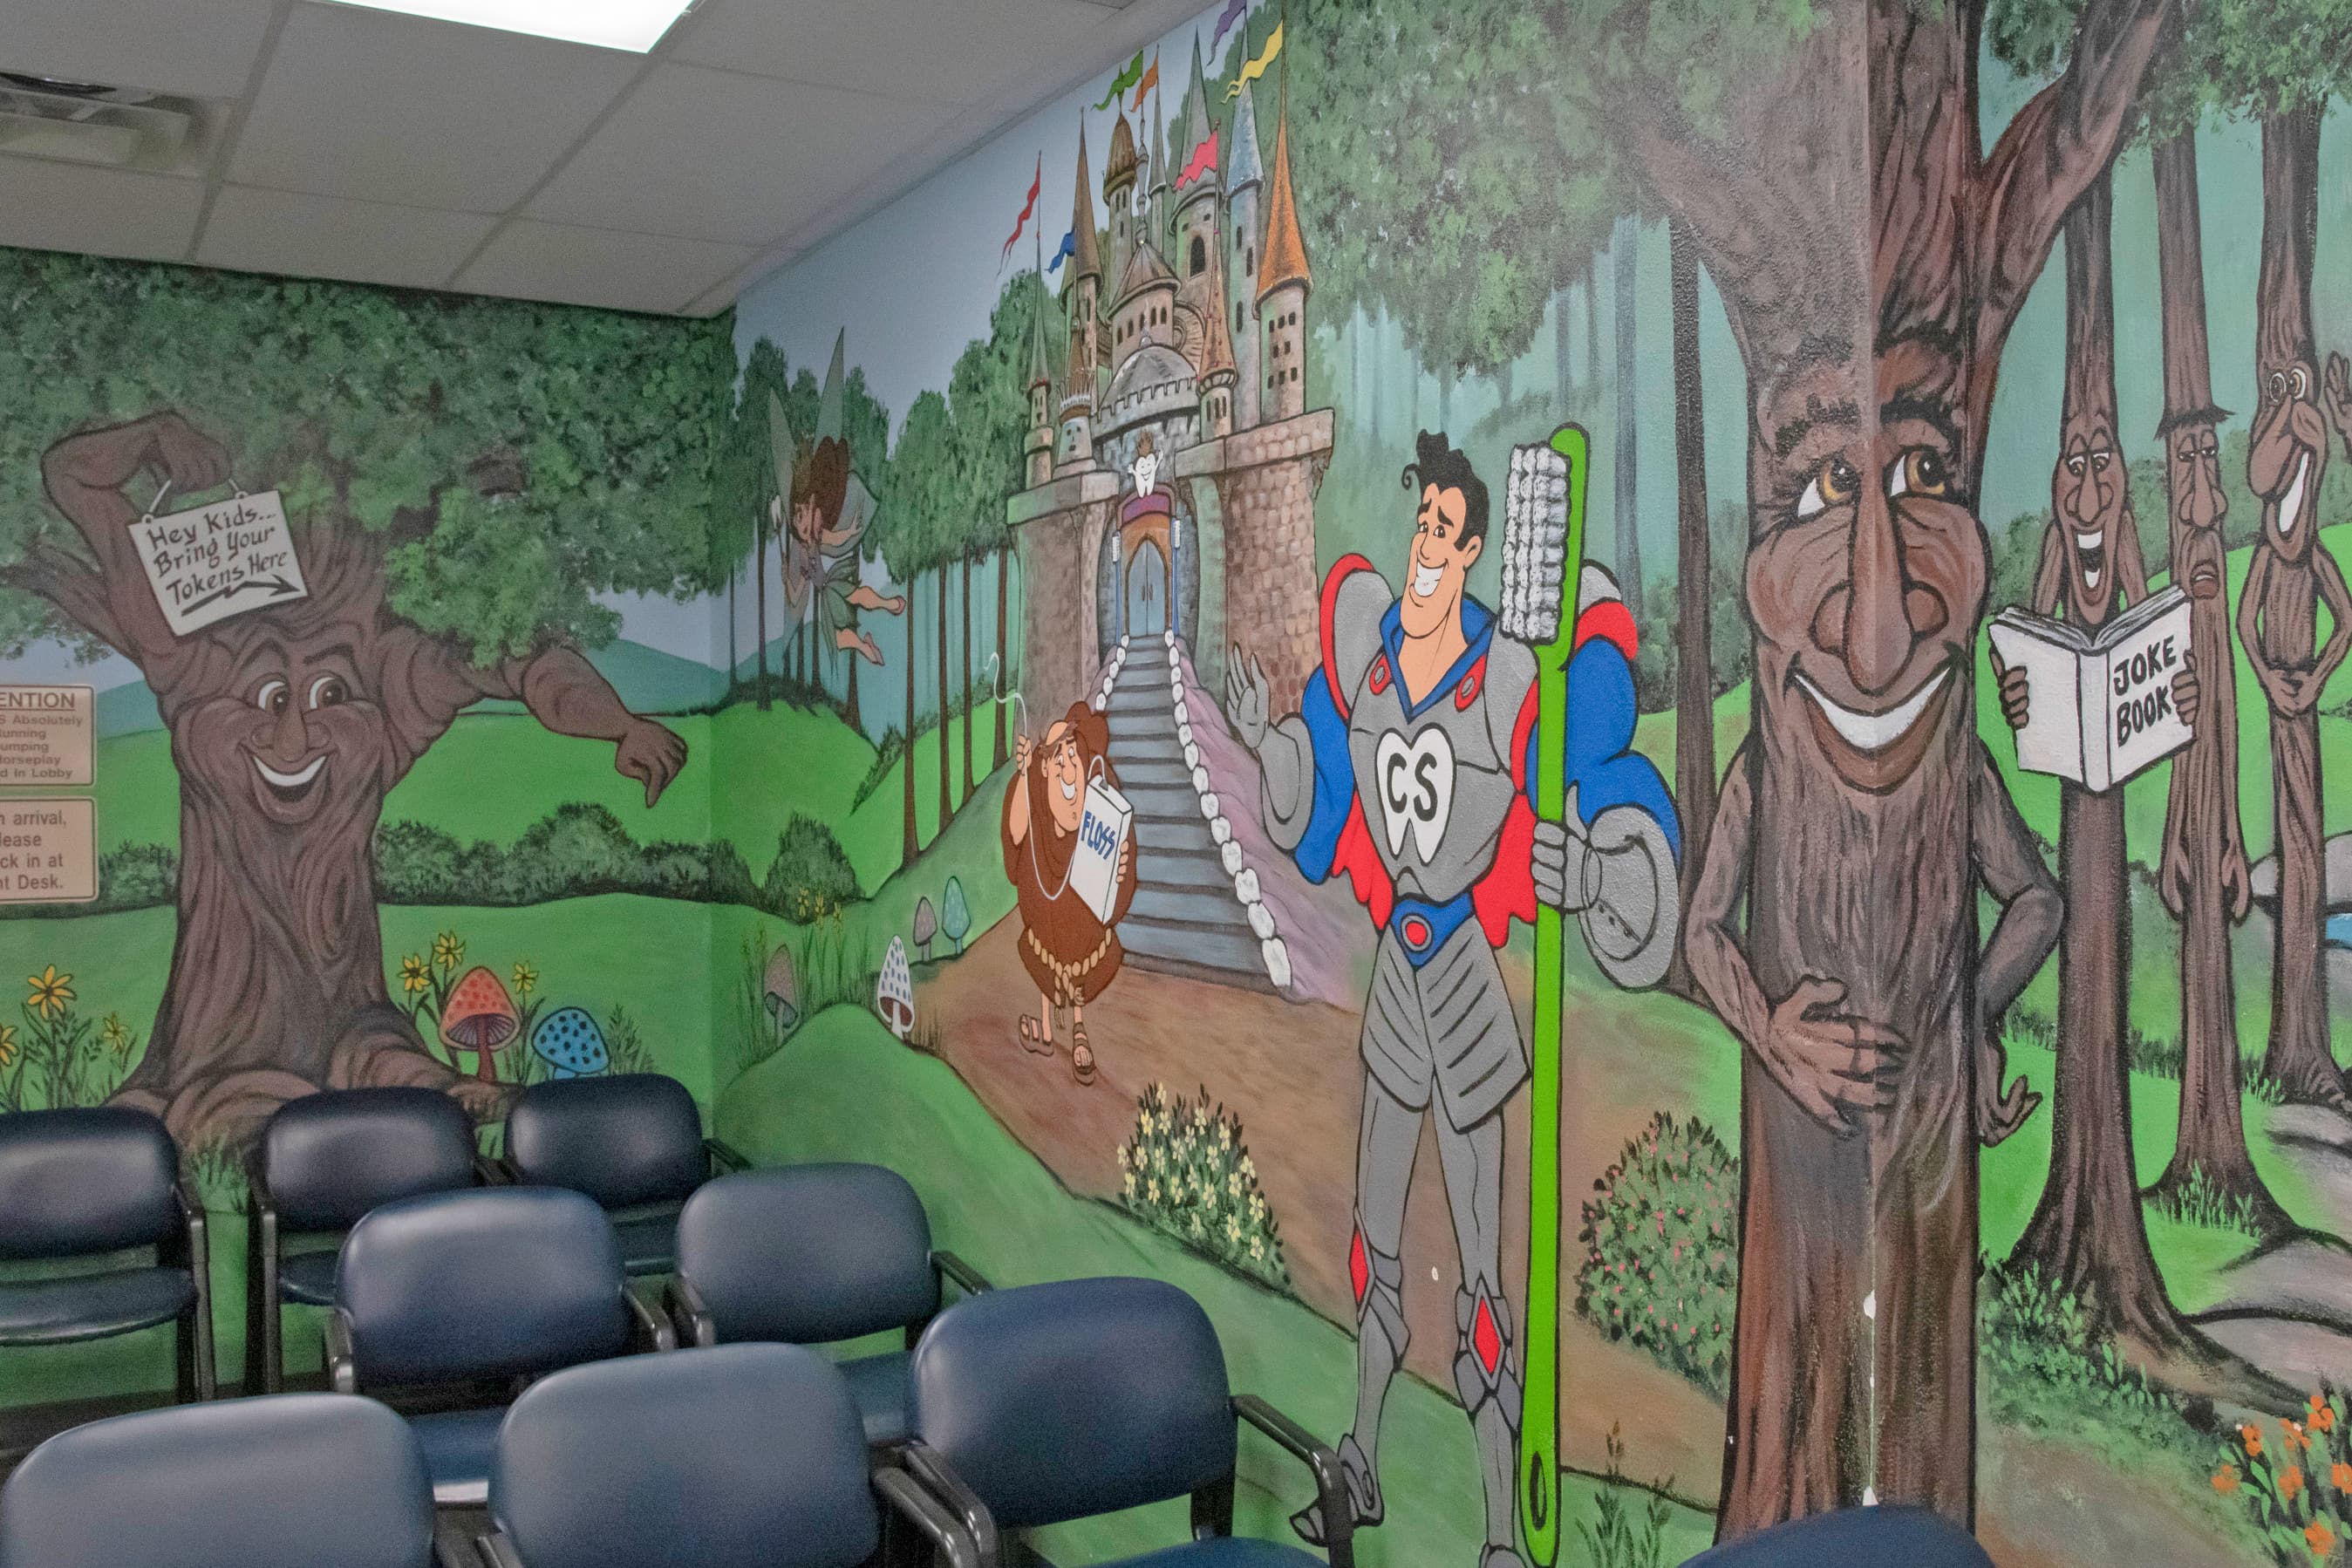 waiting room with a large mural painted on the wall